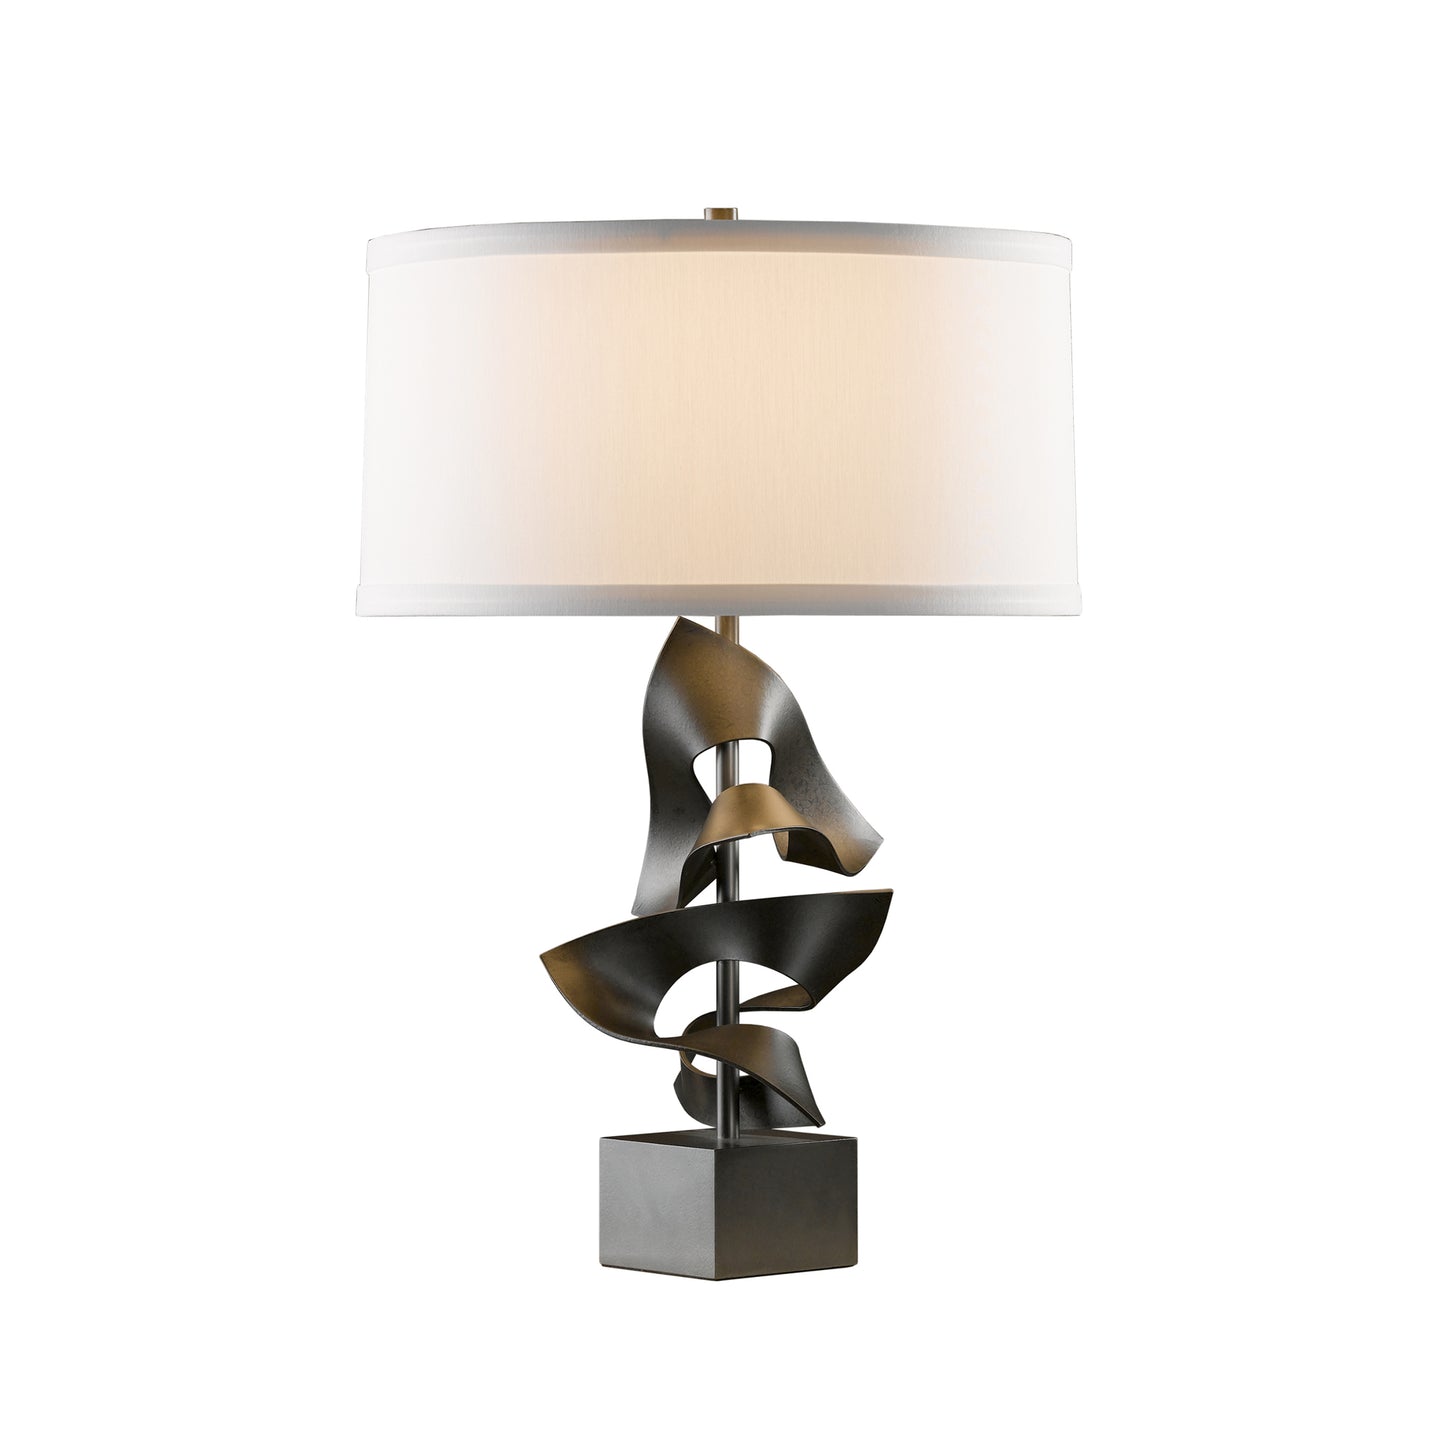 A Gallery Two Fold Table Lamp by Hubbardton Forge with a unique design featuring a black base and a white shade.